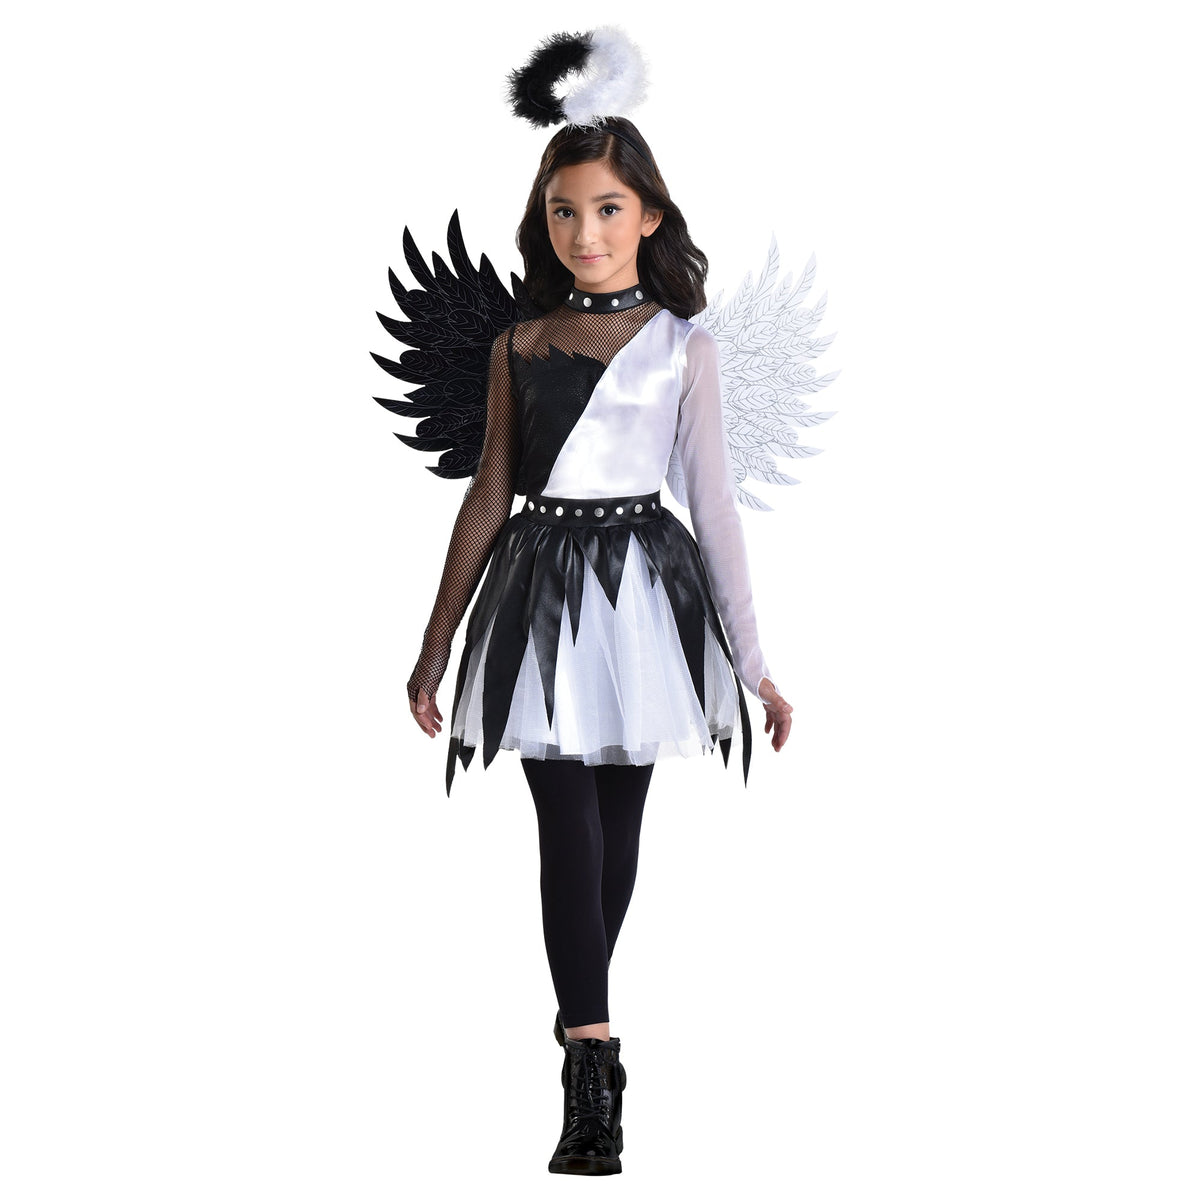 HALLOWEEN COSTUME CO. Costumes Twisted Angel Costume for Kids, White and Black Dress